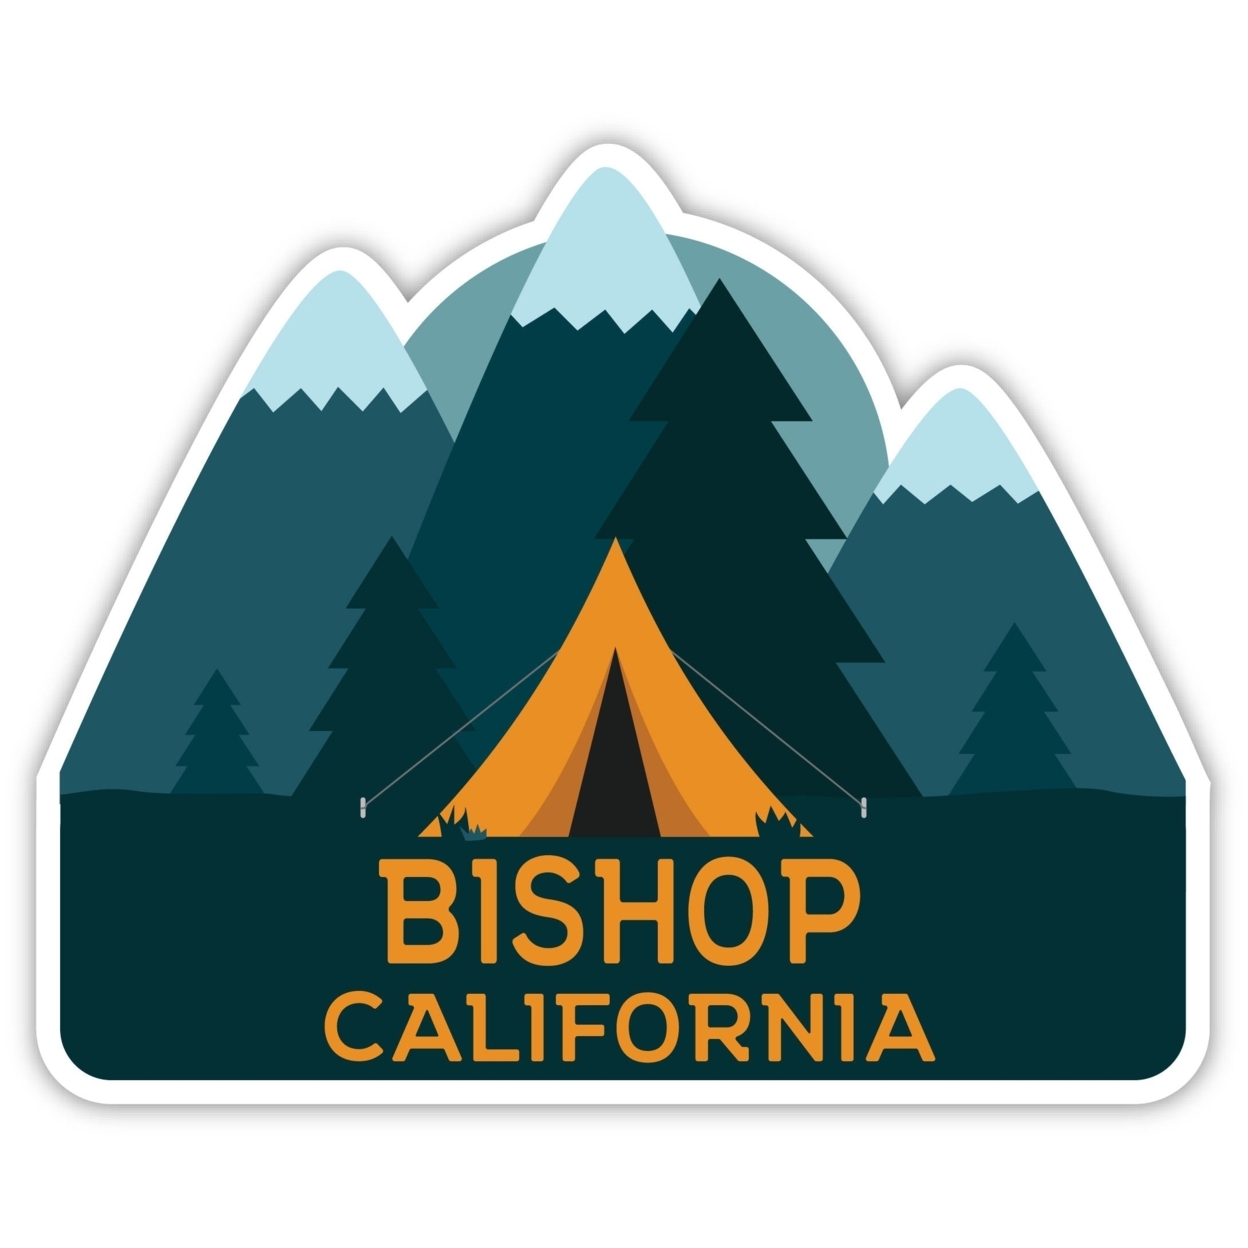 Bishop California Souvenir Decorative Stickers (Choose Theme And Size) - 4-Pack, 2-Inch, Bear